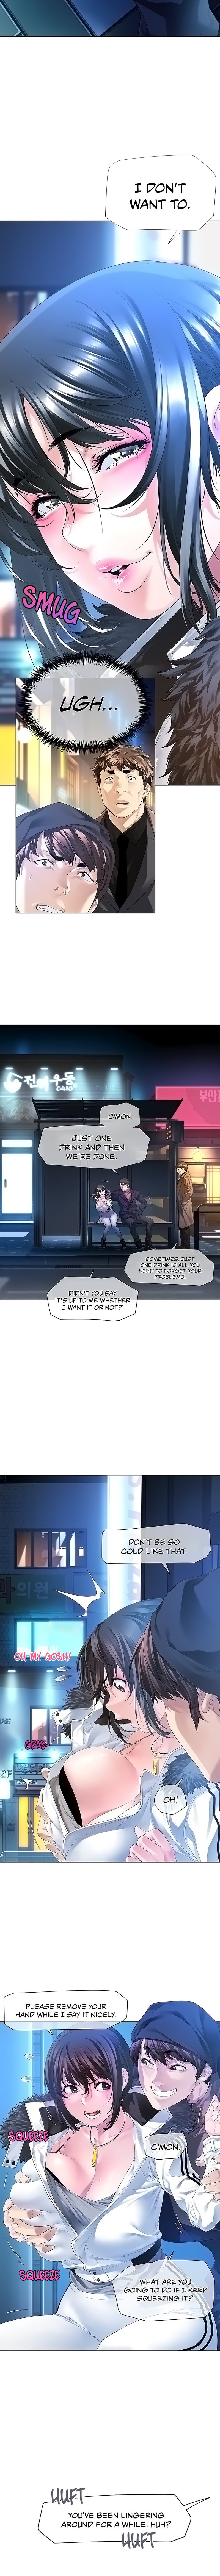 Winter short story: Can I like you Mister? - Chapter 7 Page 8